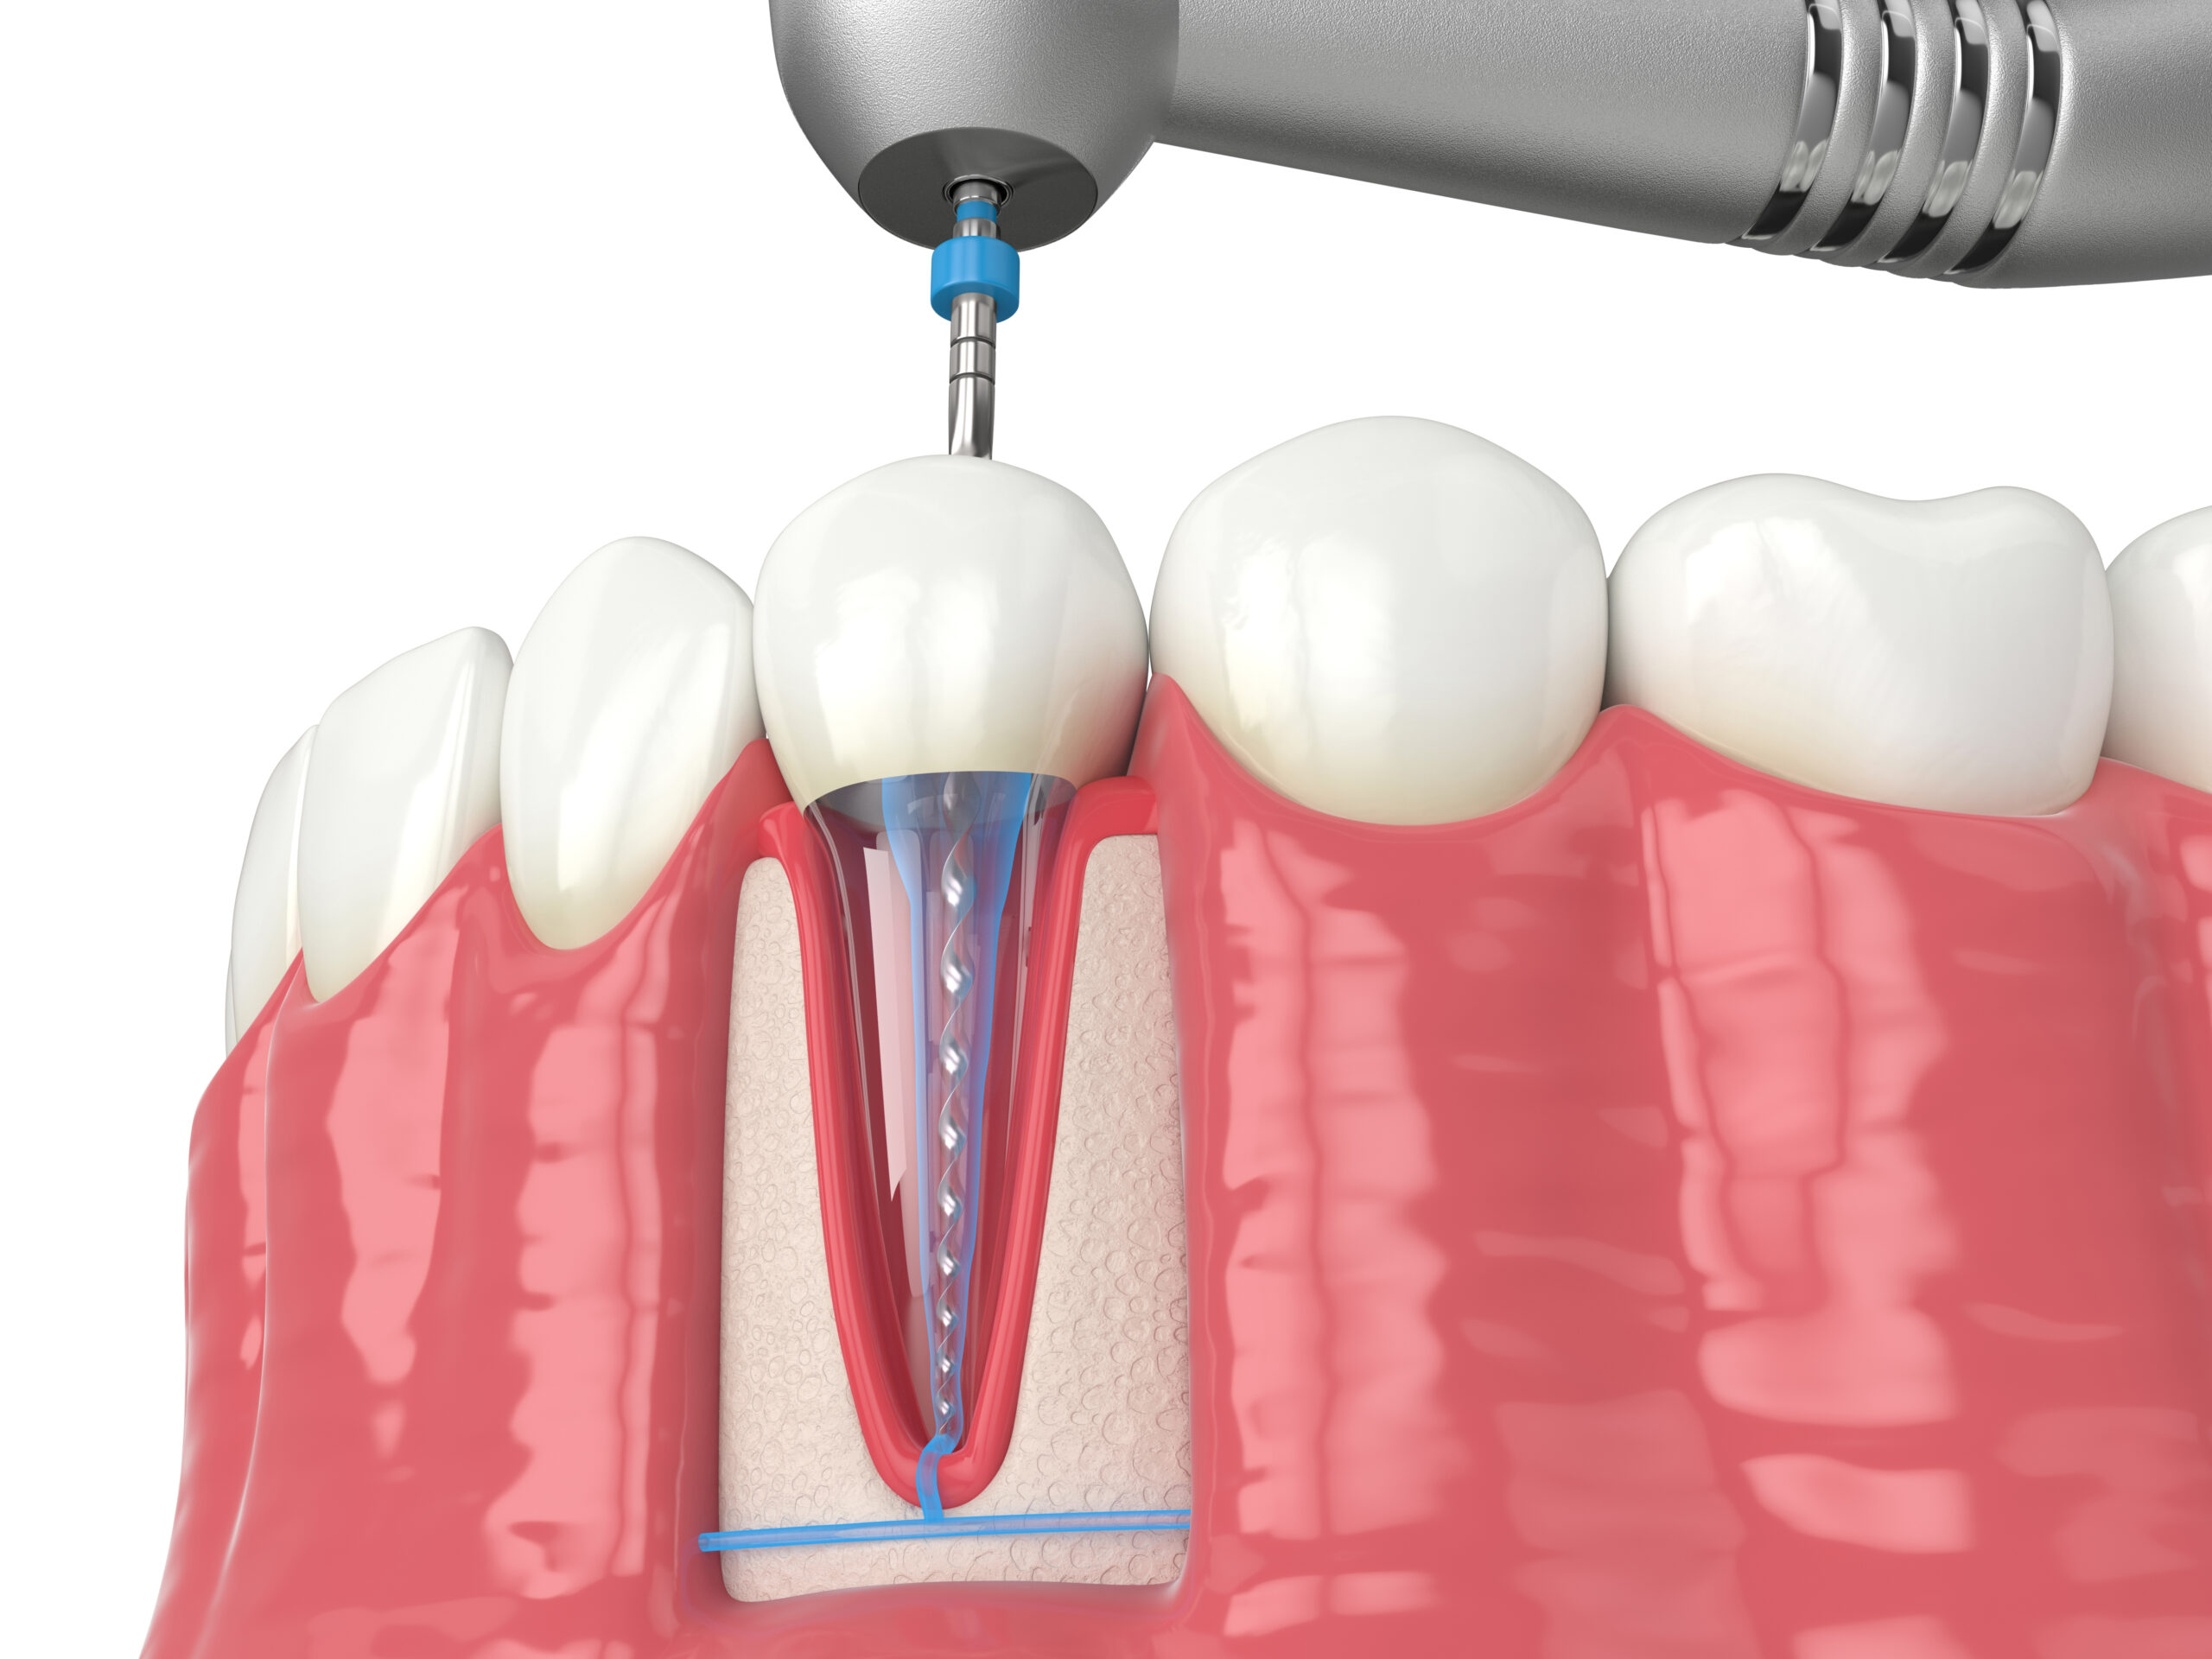 Understanding Endodontic Treatment: Types, Benefits, and Solutions